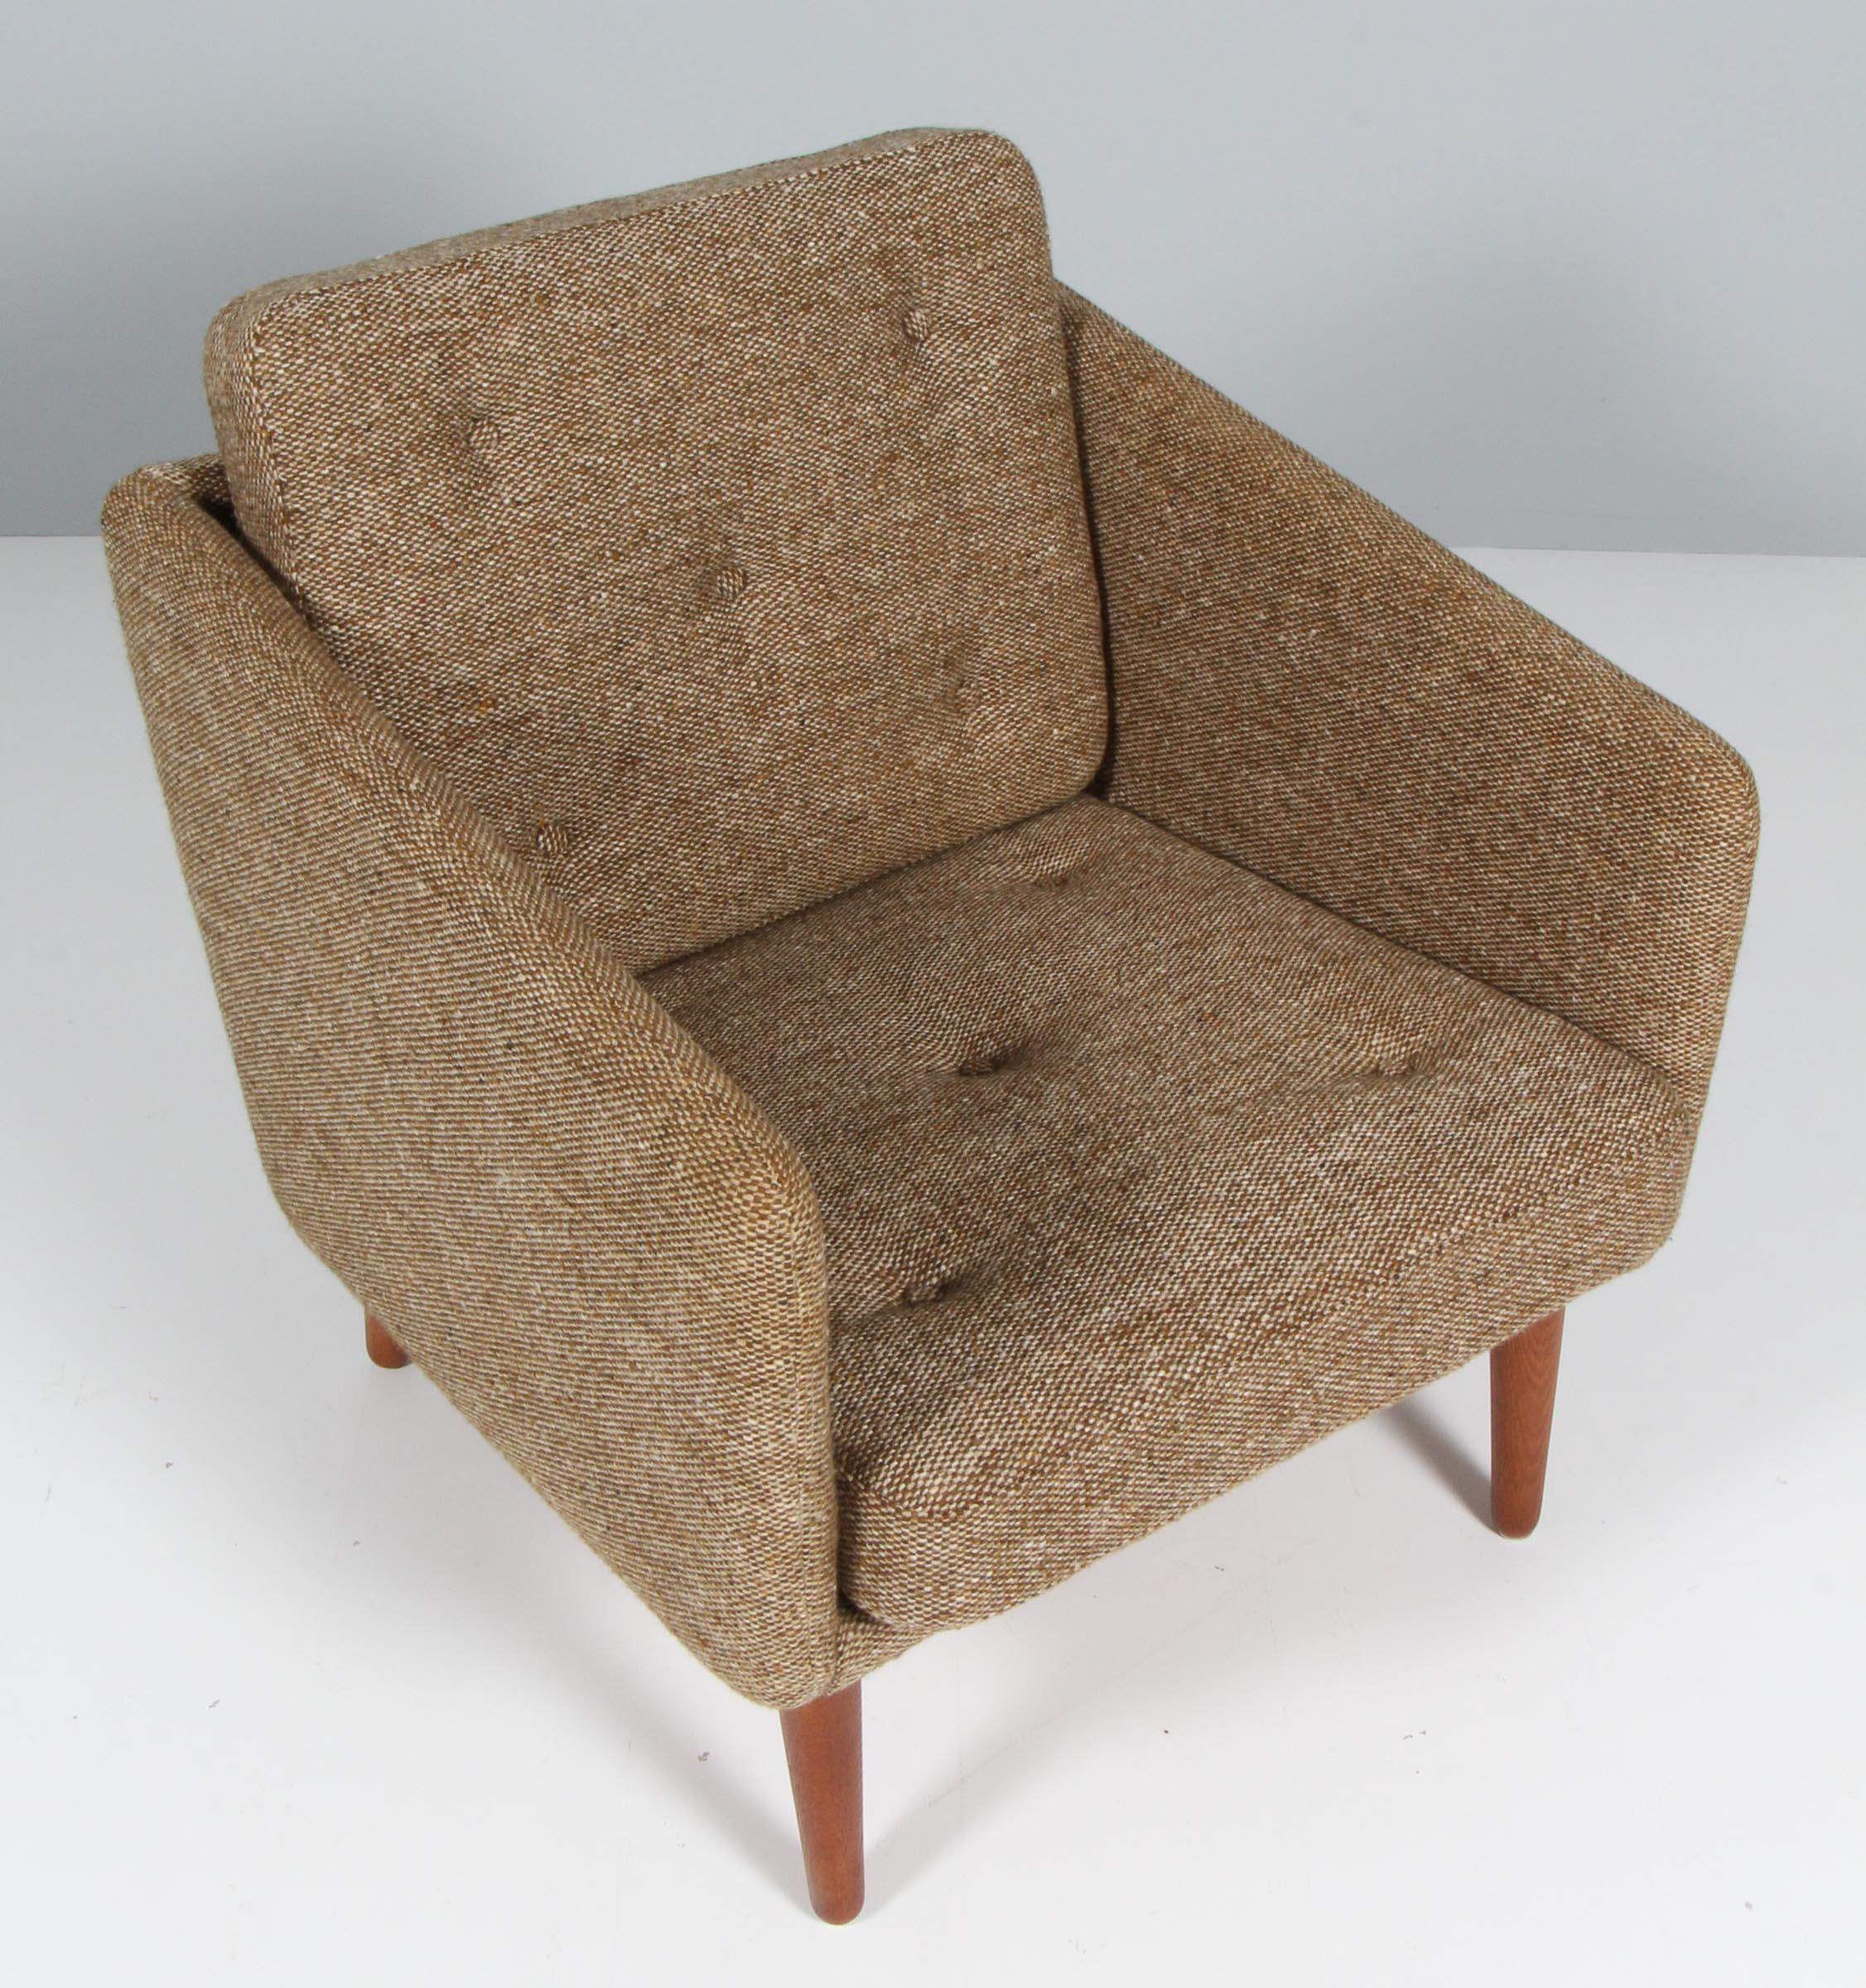 Børge Mogensen lounge chair, original upholstered with wool

Legs of oak.

Model 201, made by Fredericia Furniture.

This is the old model 201 which was the first sofa that Børge Mogensen designed. The model has been put in production again in